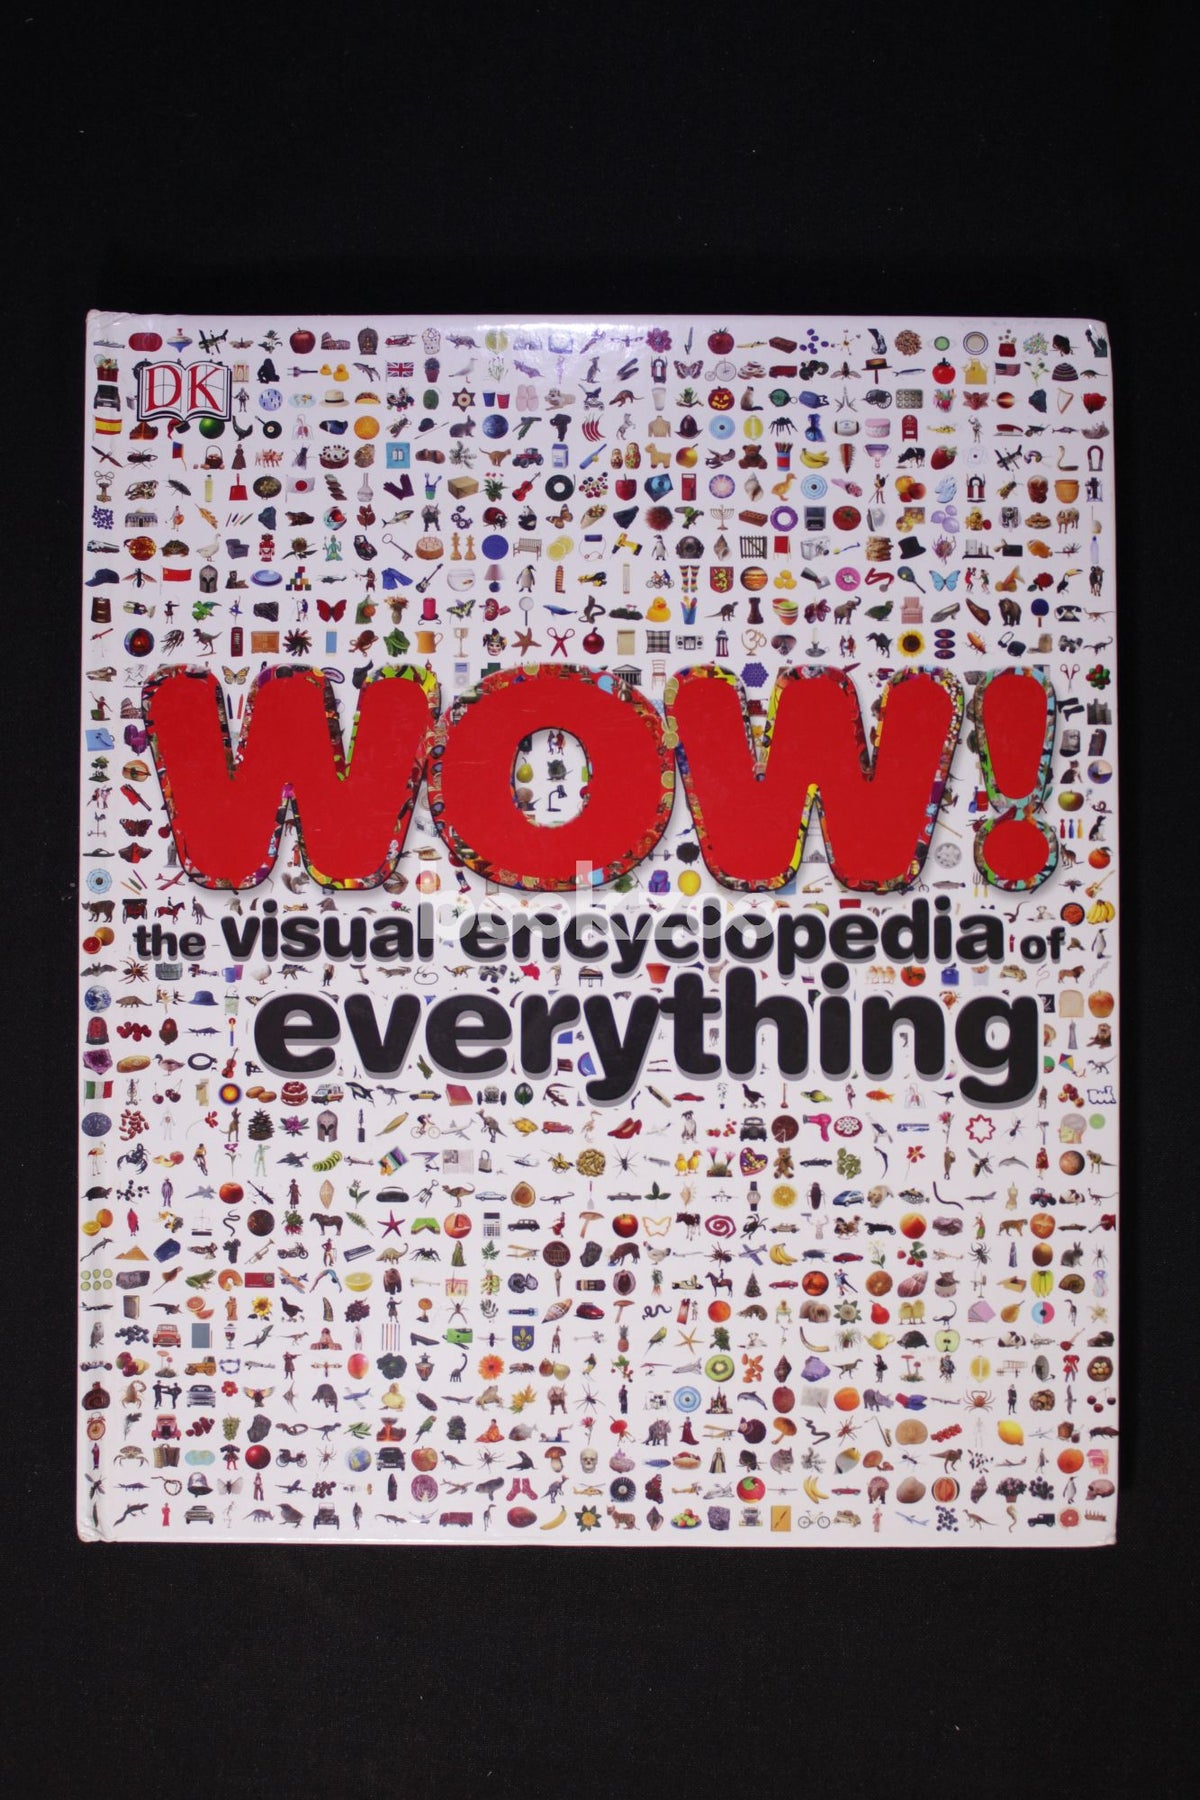 bookstore　Ferris,　Julie　Online　Everything　by　Encyclopedia　Bryan　at　WOW!　Buy　—　of　The　Visual　Kim